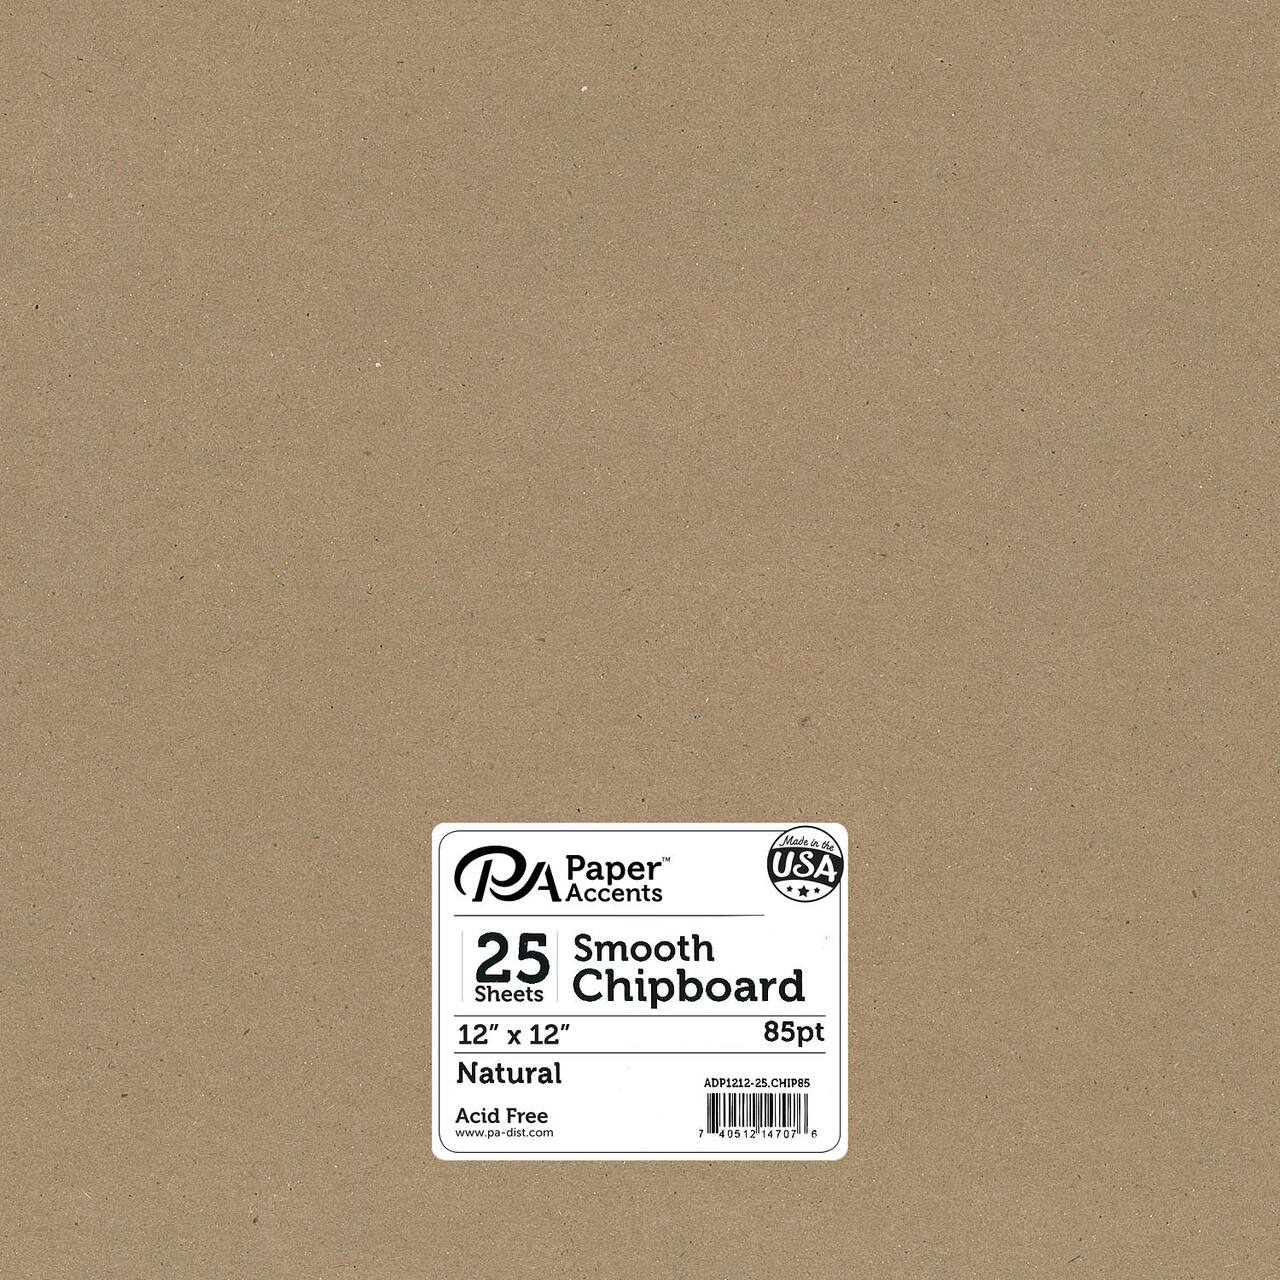 PA Paper&#x2122; Accents Natural 12&#x22; x 12&#x22; 85pt. Heavy Chipboard, 25 Sheets